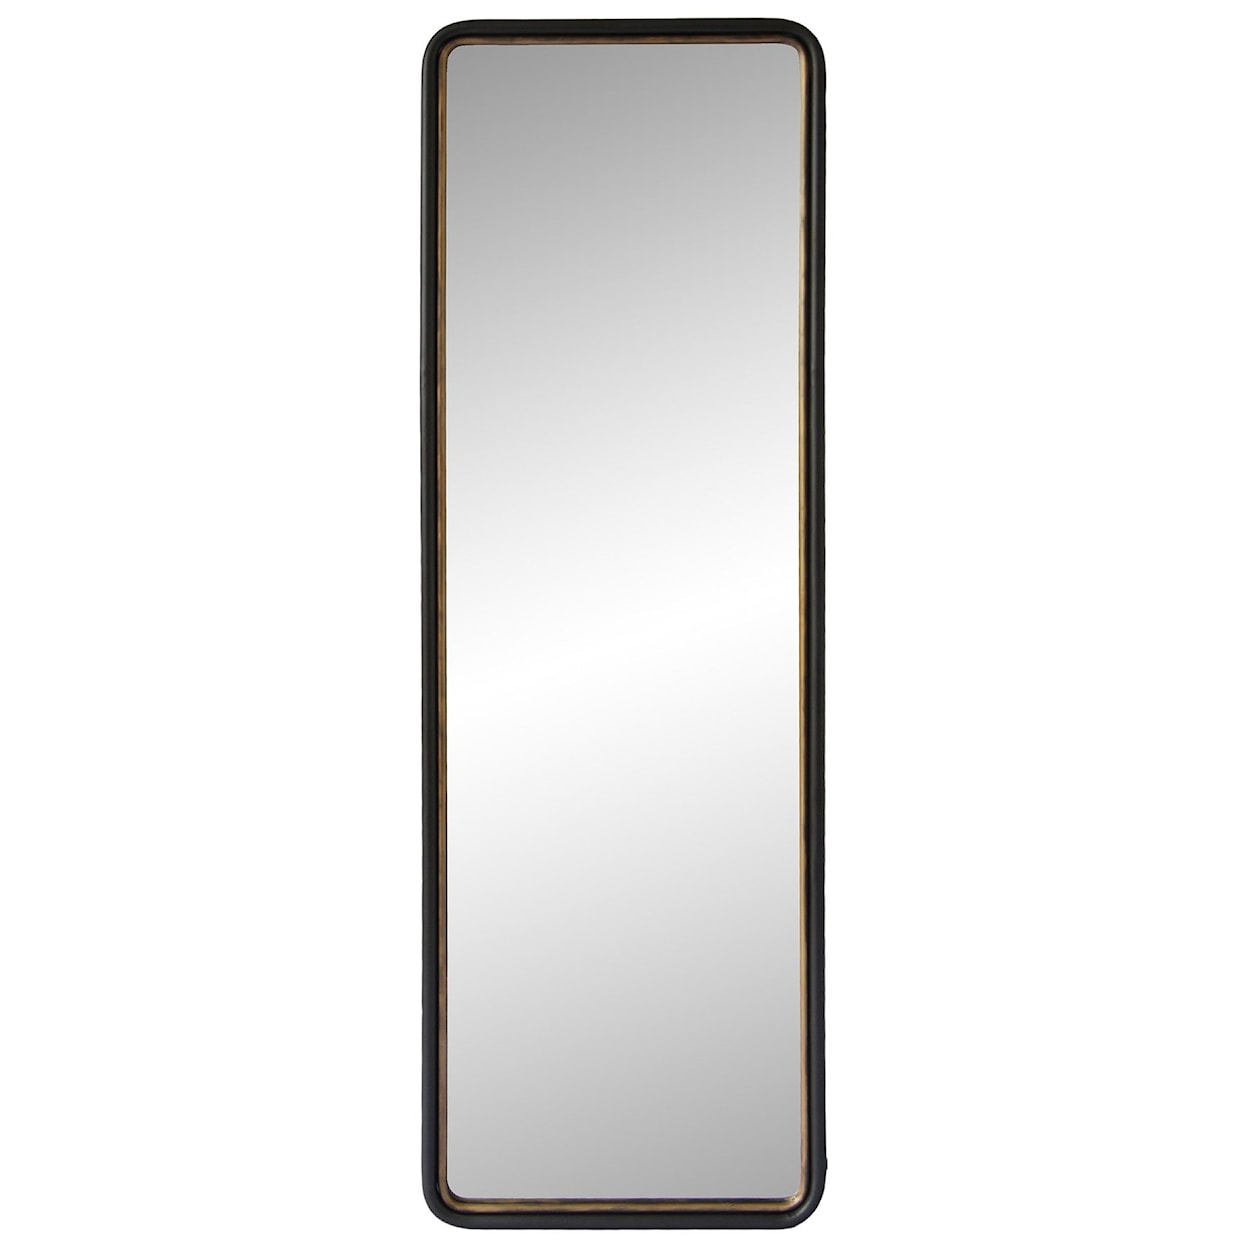 Moe's Home Collection Mirrors and Screens Sax Tall Mirror with Brushed Gold Details